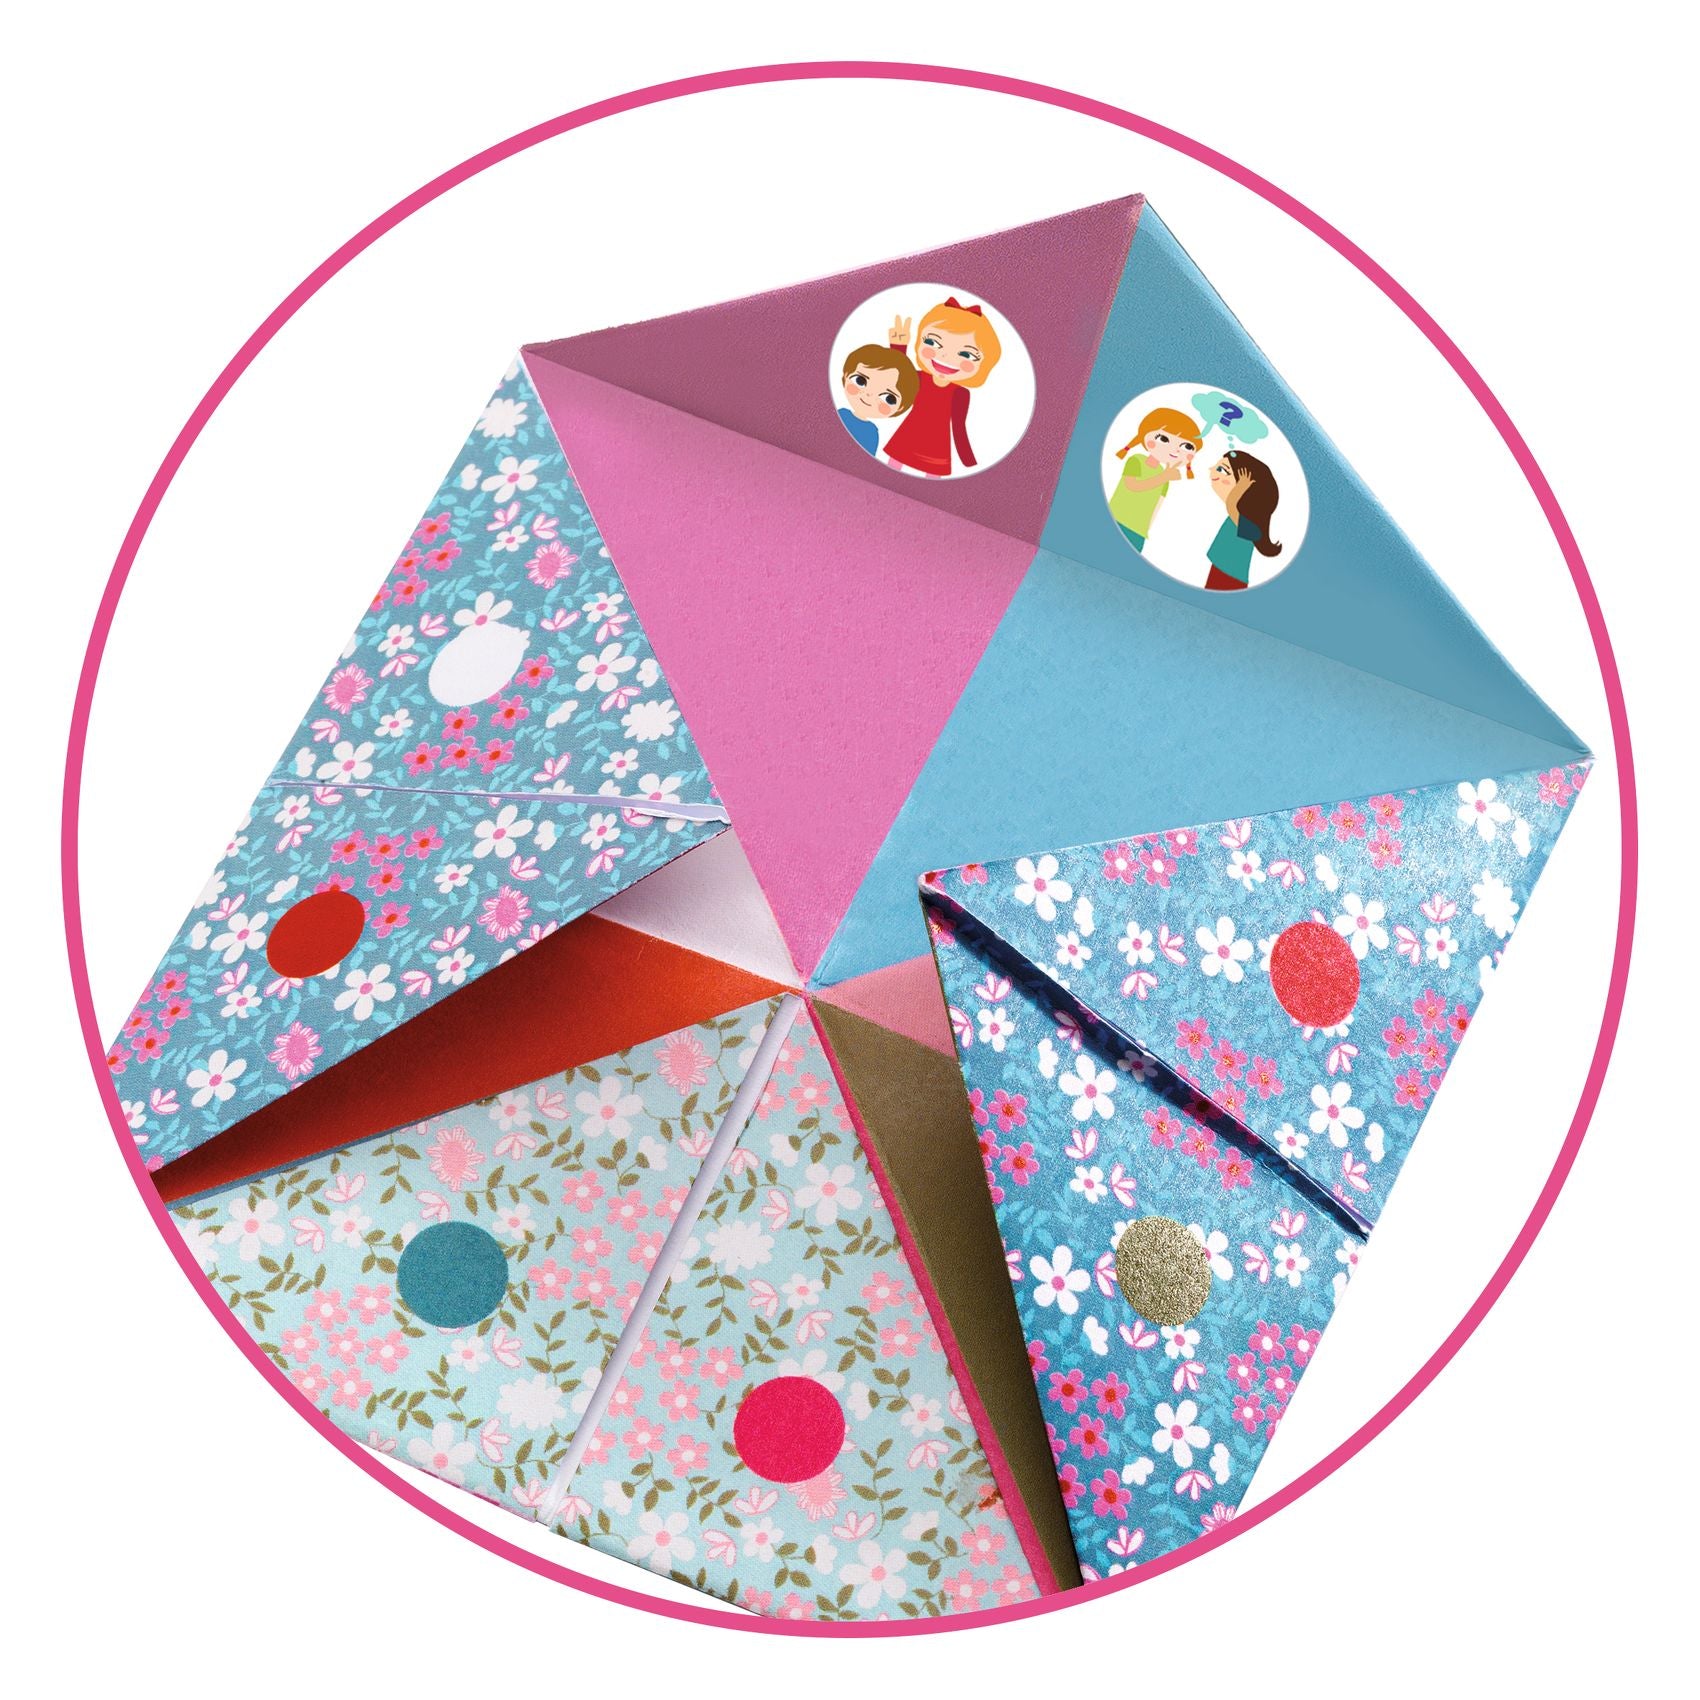 Djeco Origami Fortune Tellers – Flowers